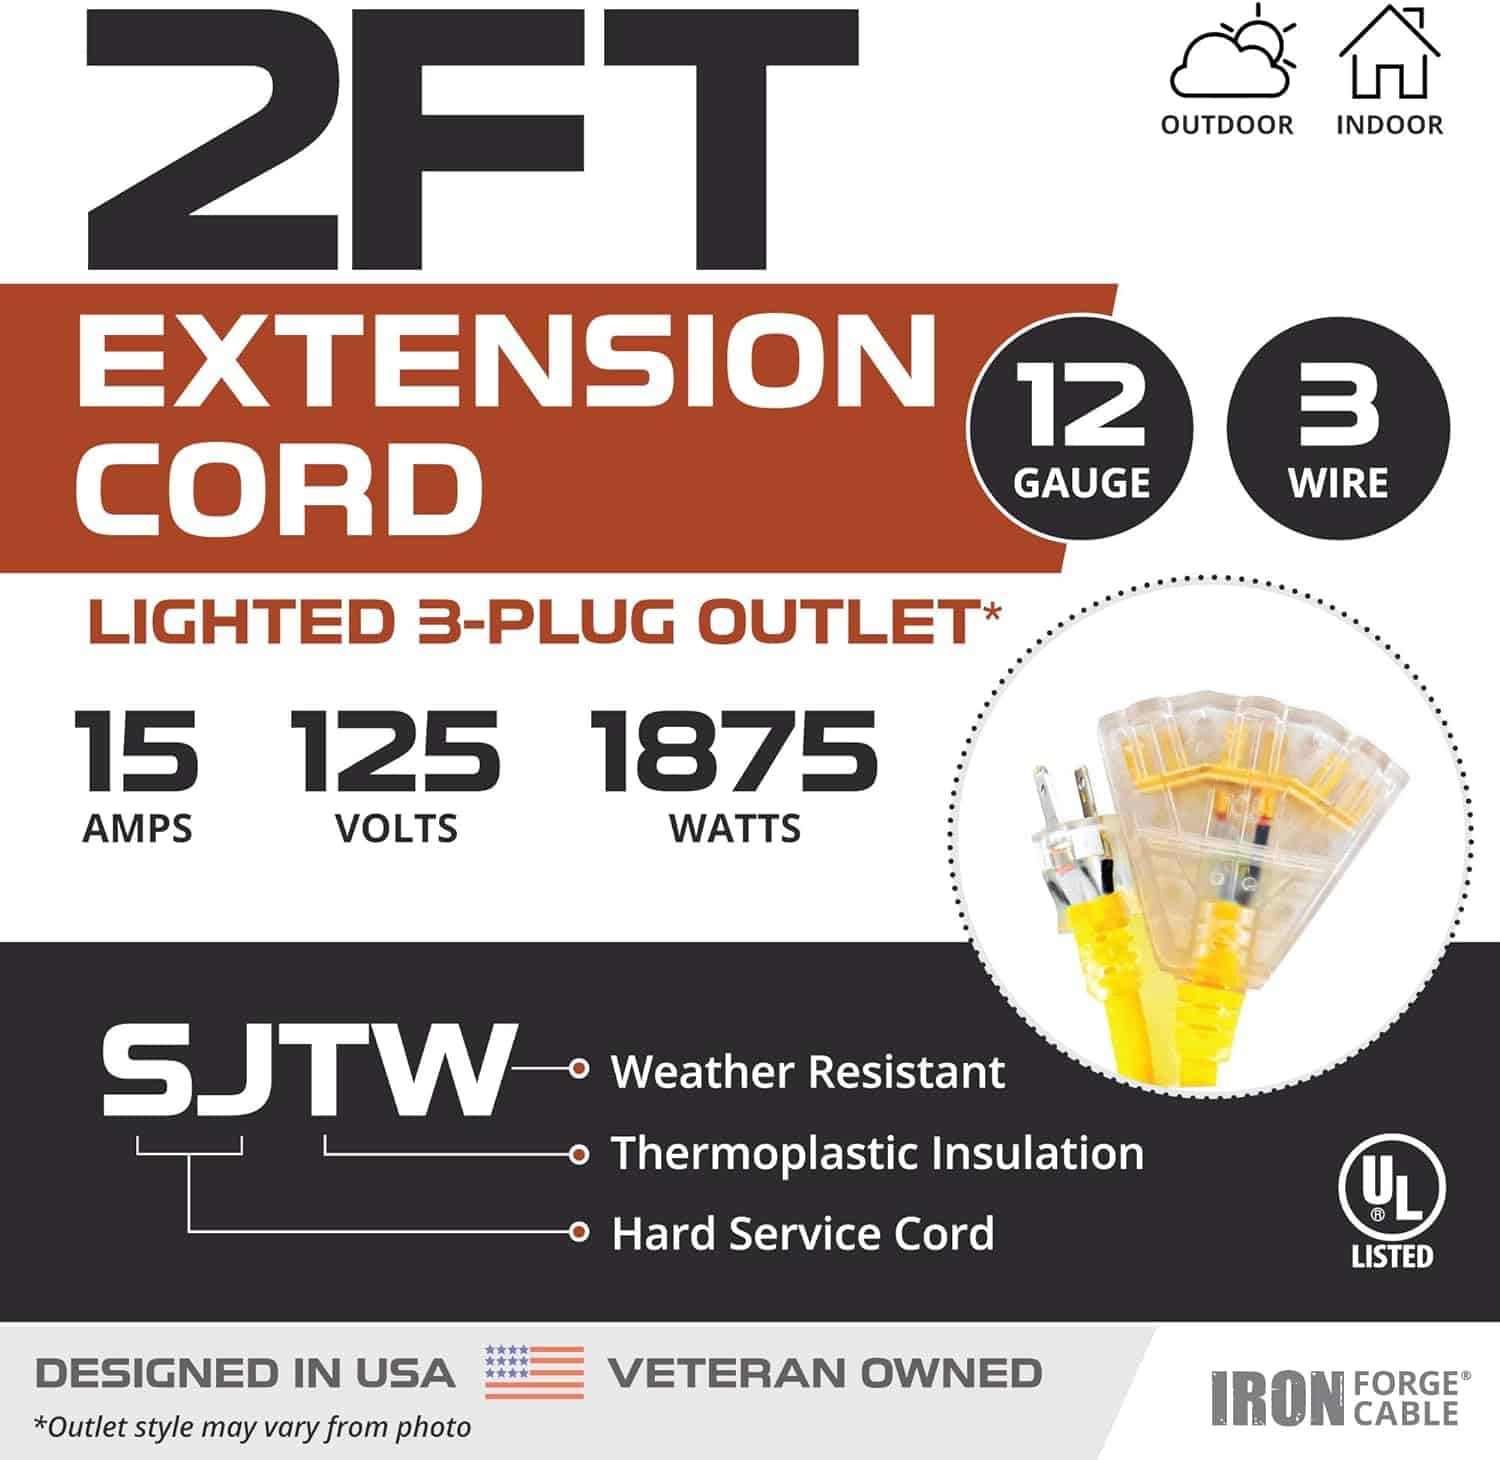 IRON FORGE 2 Pack of 2 ft Heavy Duty Extension Cord with 3 Outlets, 12 3 Outdoor Extension Cord with 3 Way Lighted Outlet & 3 Prong, 3 Way Electrical Plug, 12 Gauge Short Extension Cord, Yellow 15 AMP 2